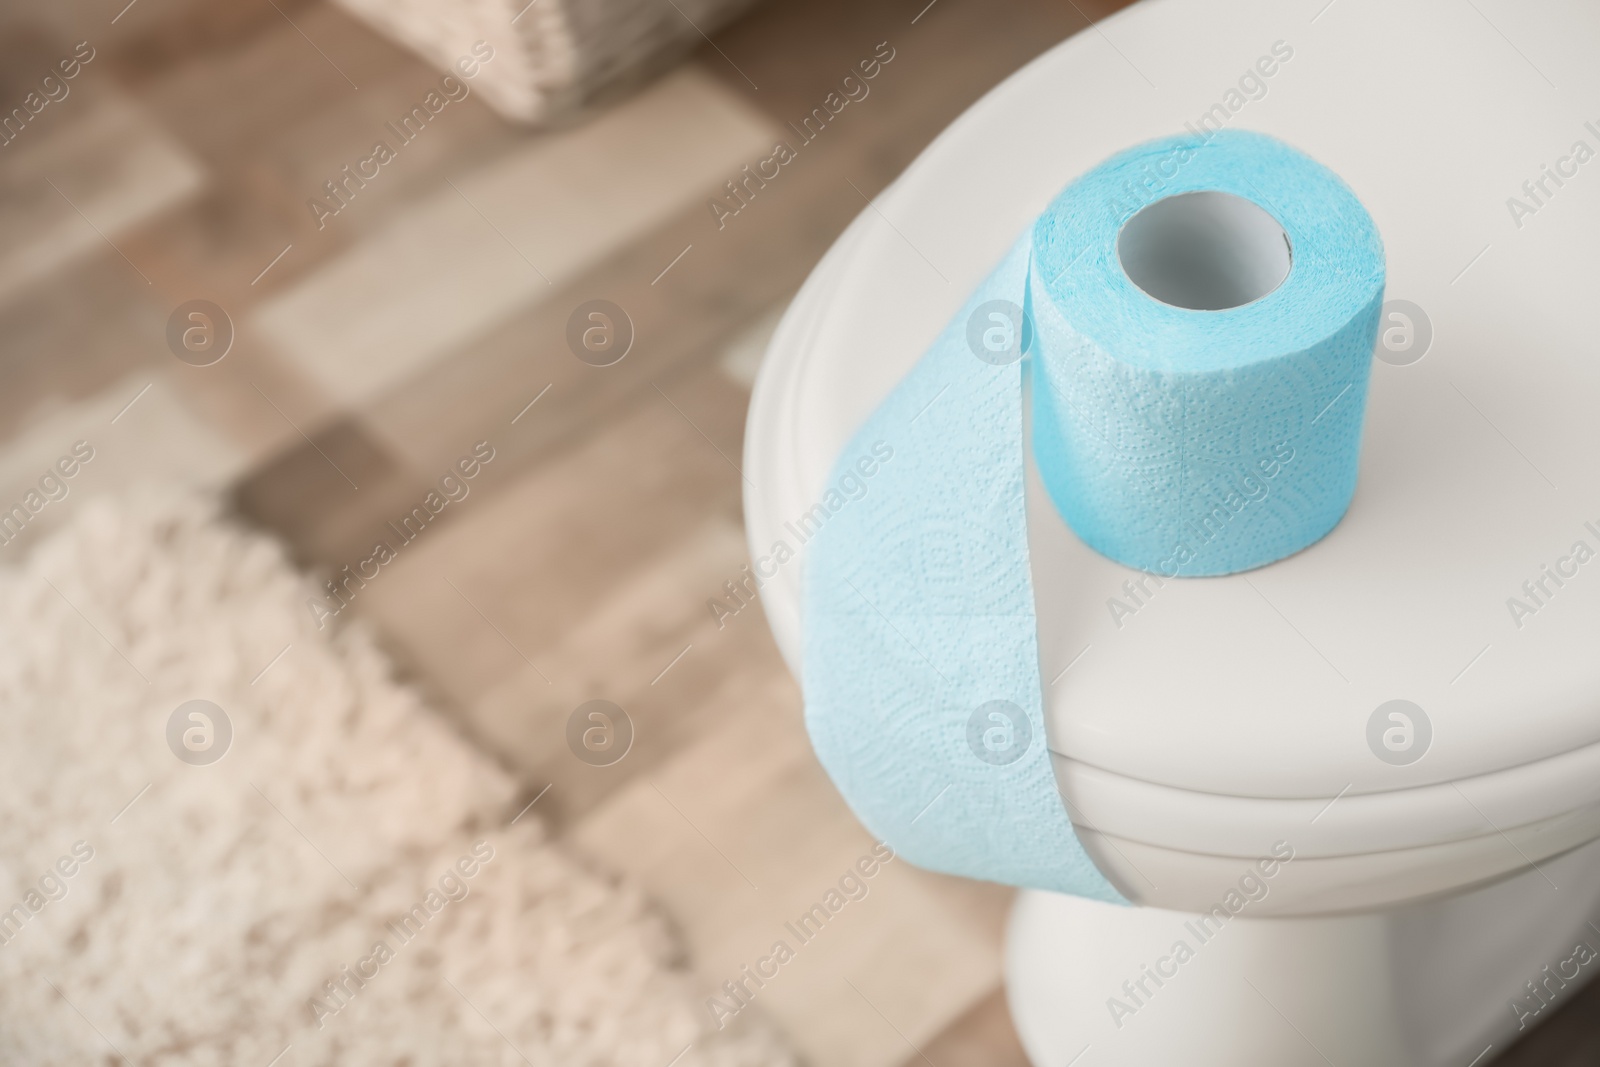 Photo of Paper roll on toilet seat lid in bathroom. Space for text